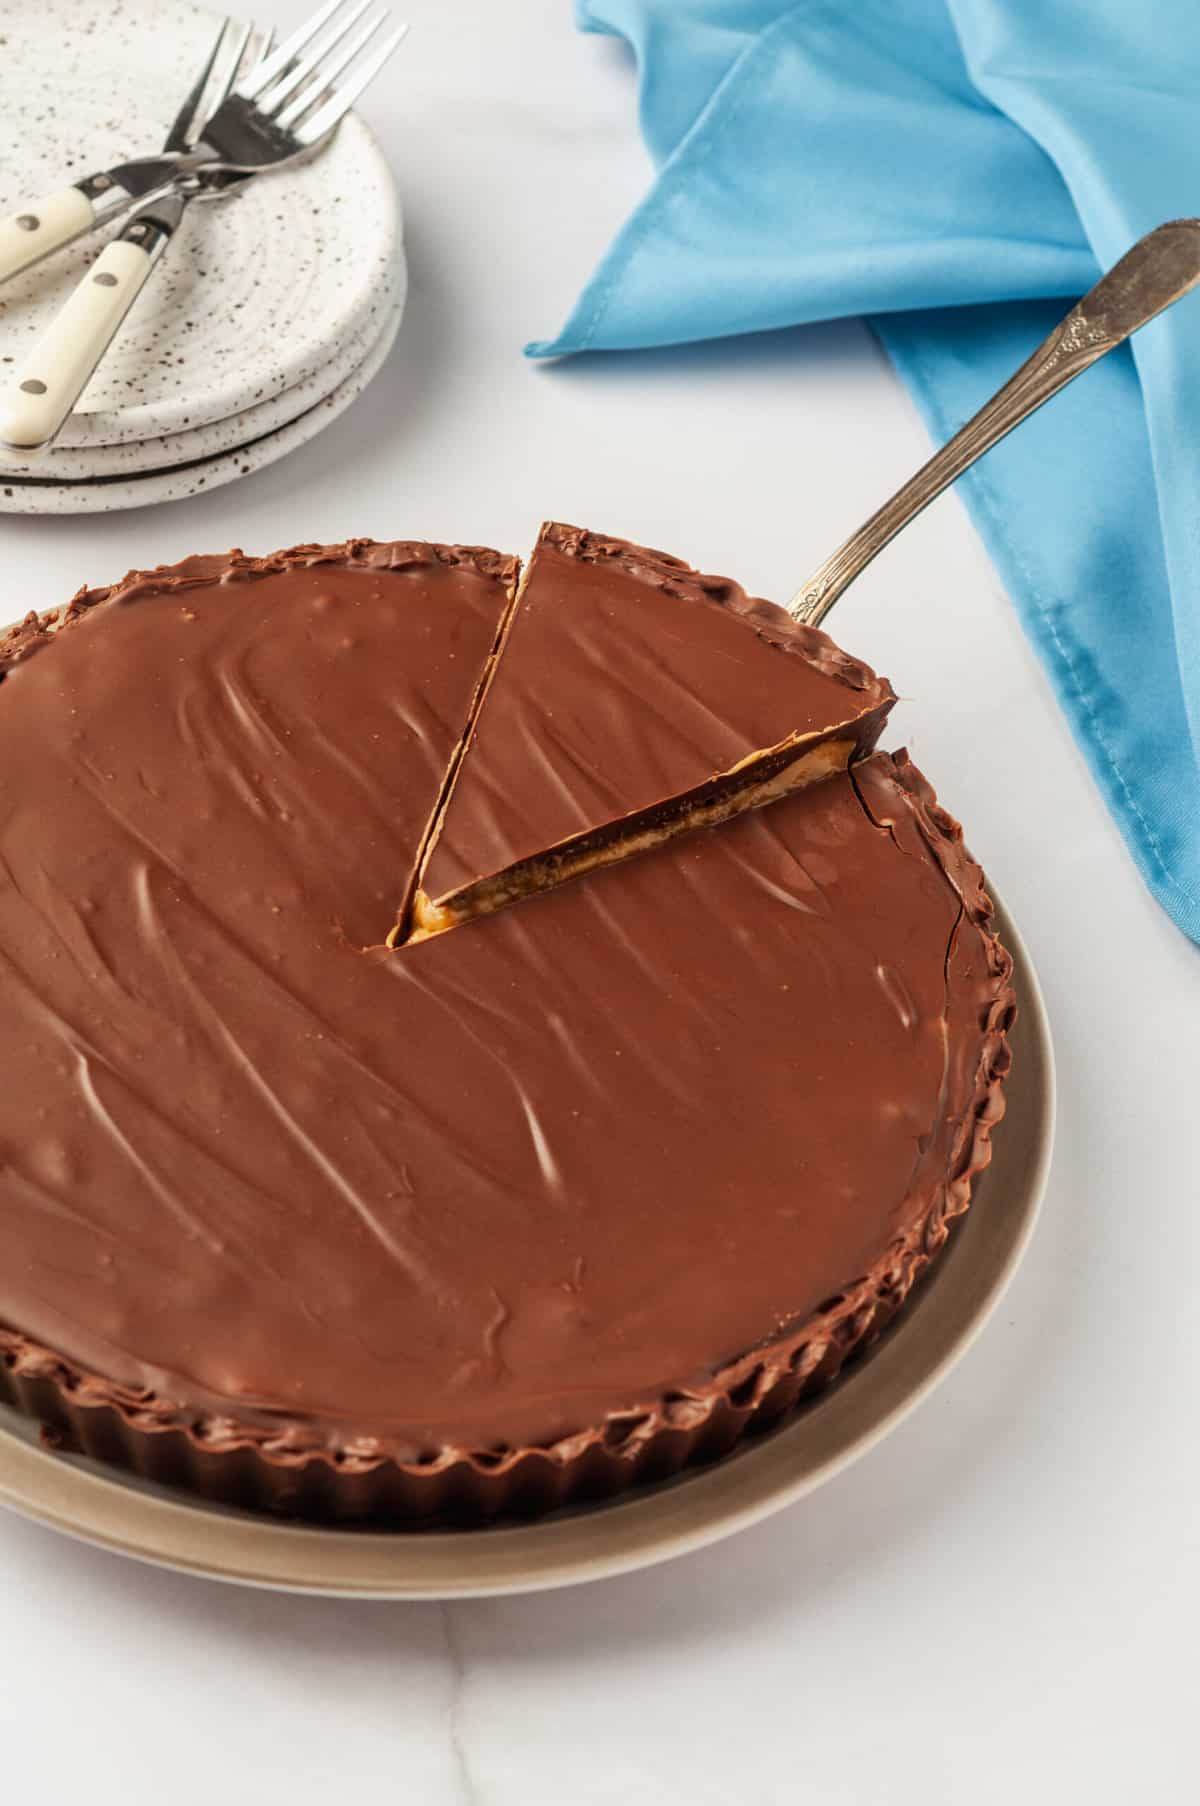 Reese's peanut butter cup pie with a slice getting taken out by a gold cake spatula